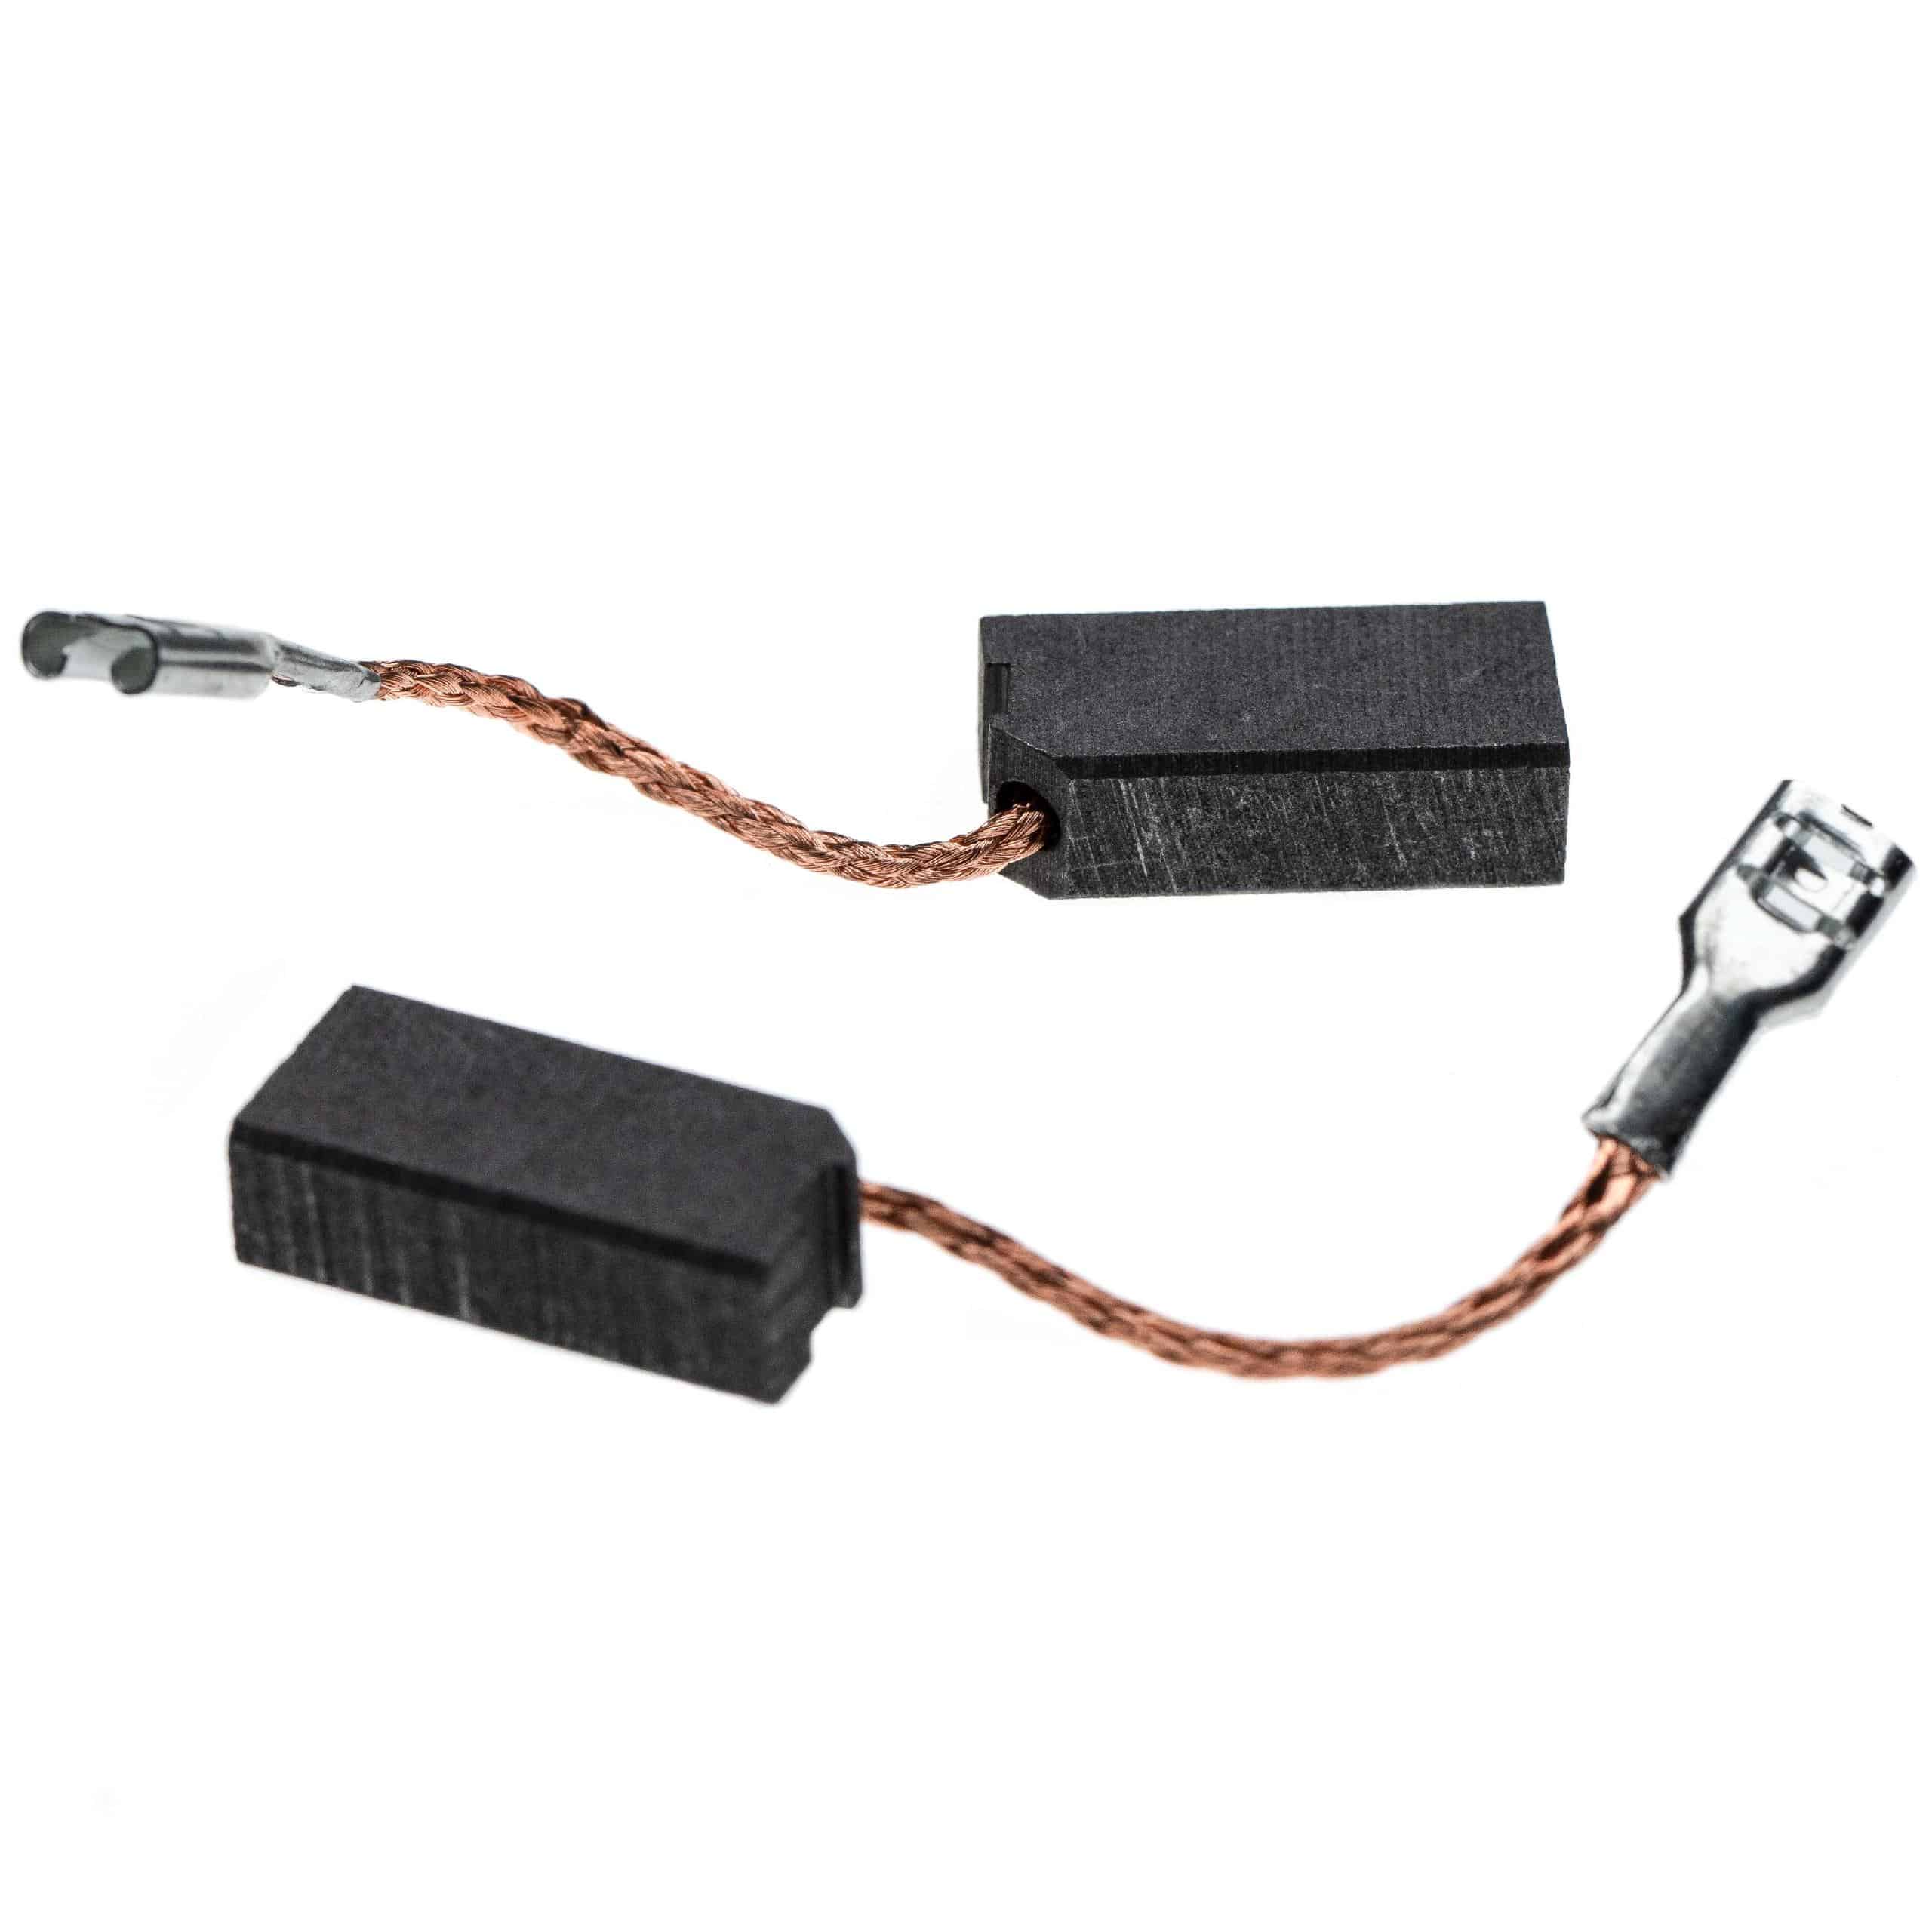 2x Carbon Brush as Replacement for Dewalt 402874-01 Electric Power Tools, 20 x 10 x 6.25mm